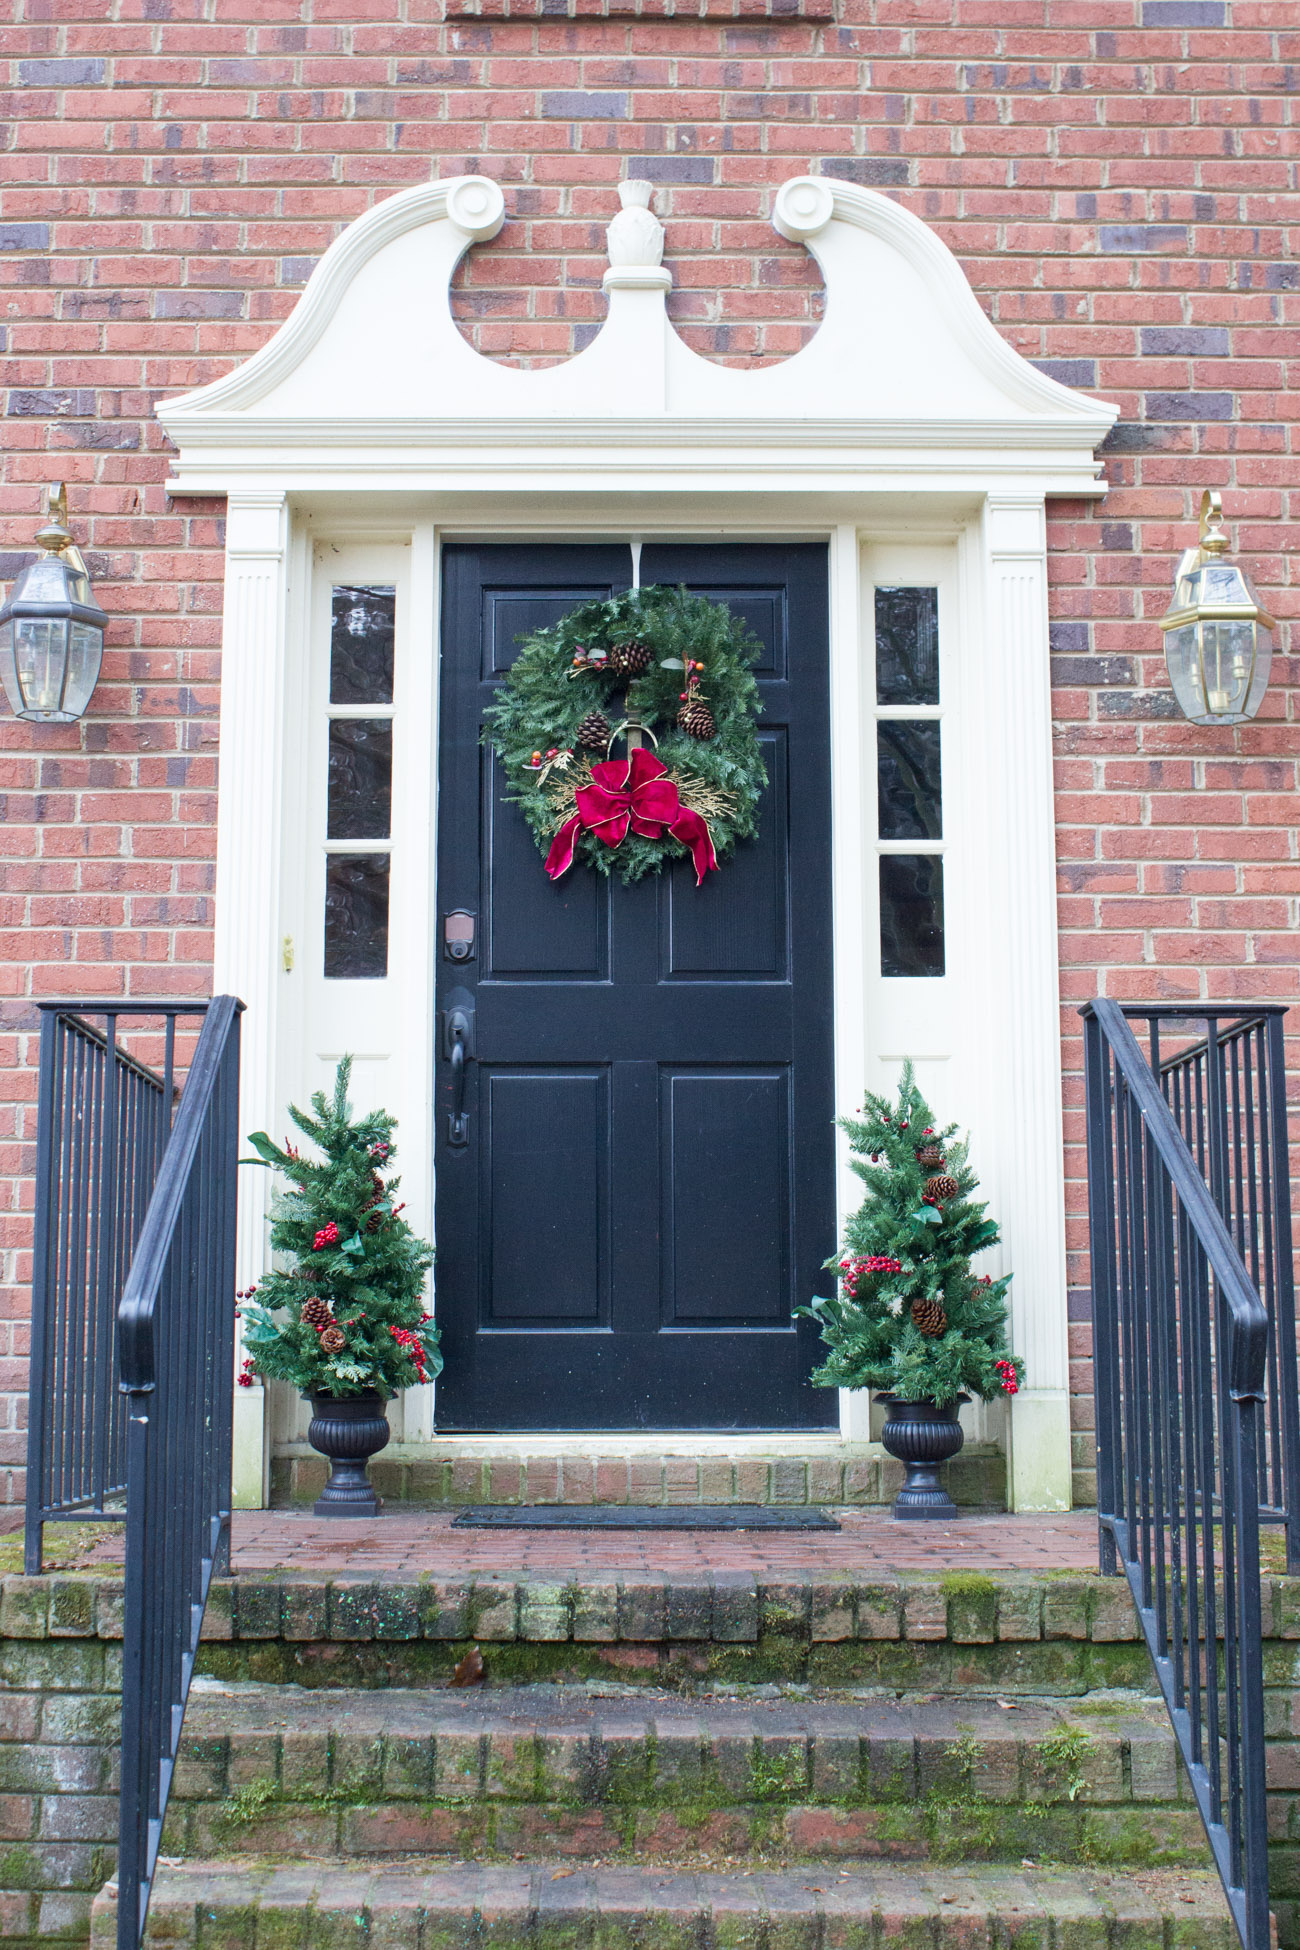 Our Christmas Porch & Entryway {Welcome Home Blog Tour} - Erin Spain